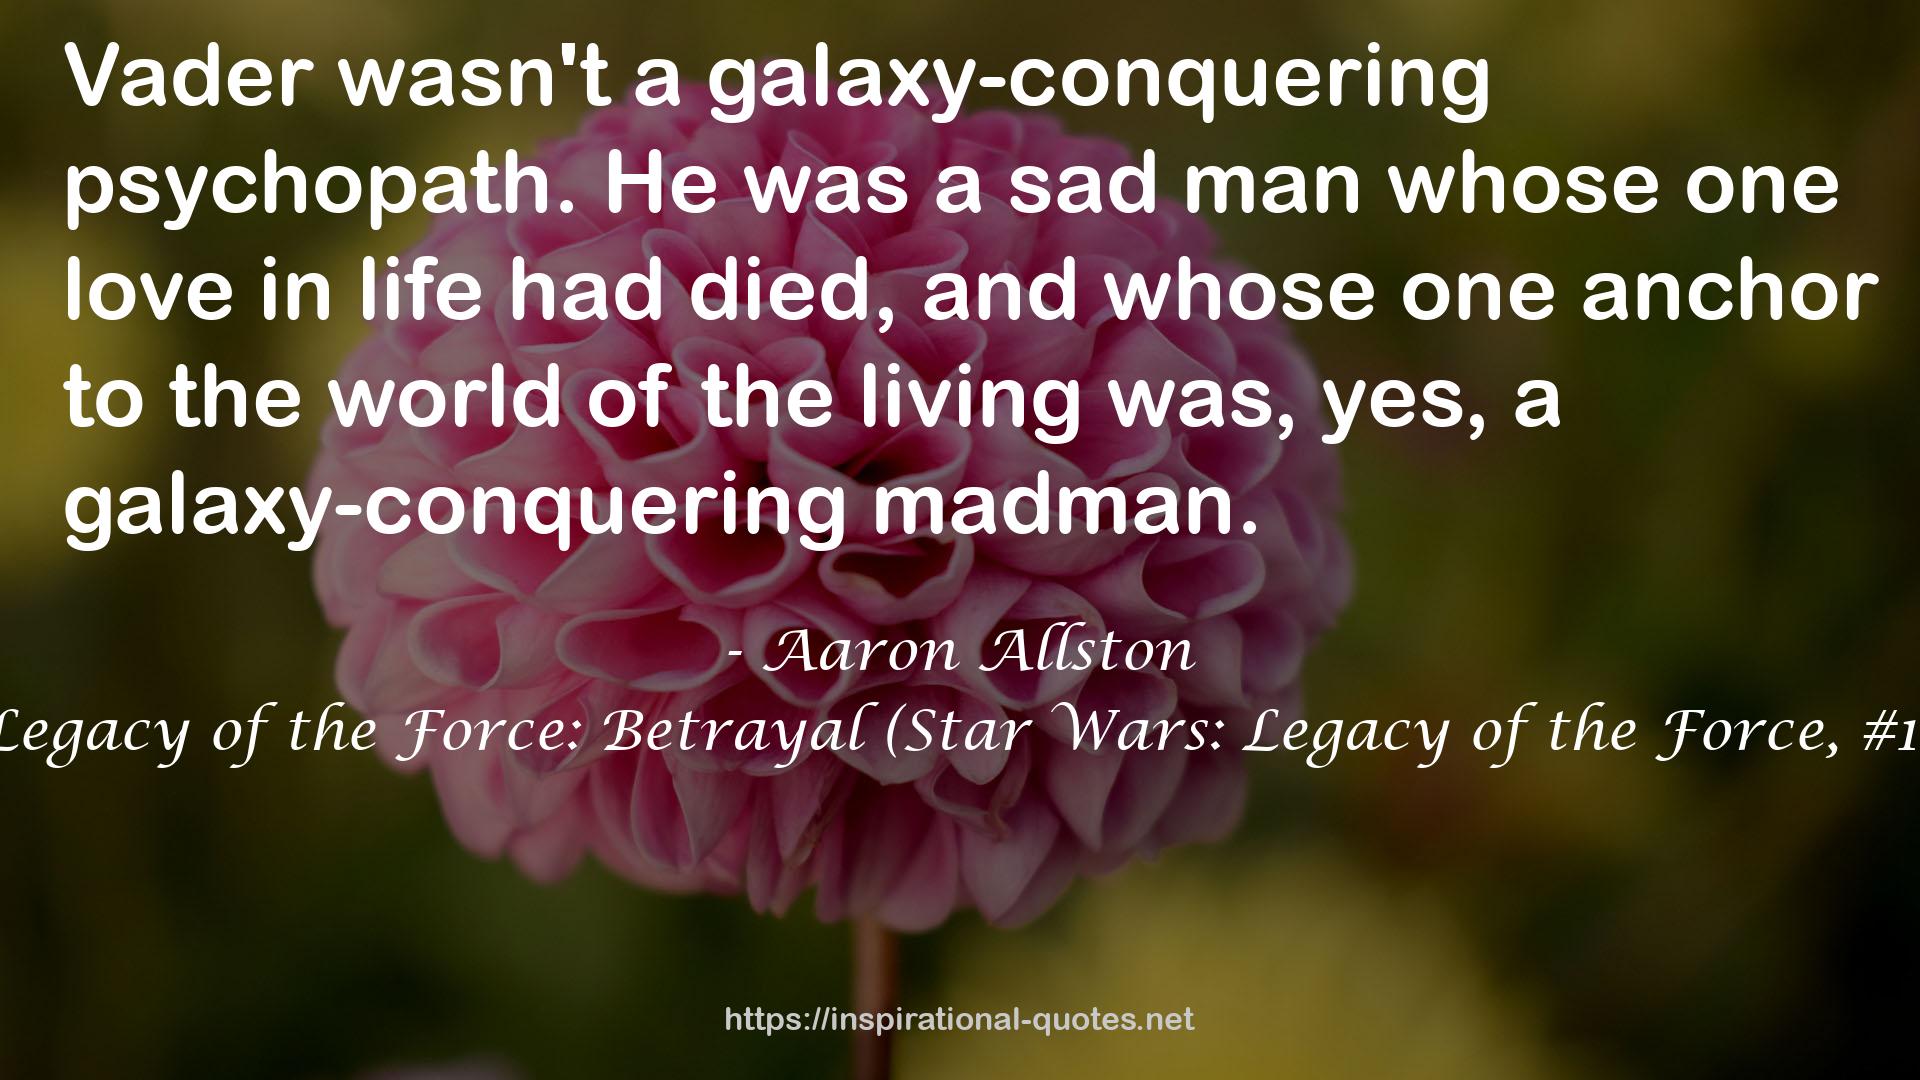 Legacy of the Force: Betrayal (Star Wars: Legacy of the Force, #1) QUOTES